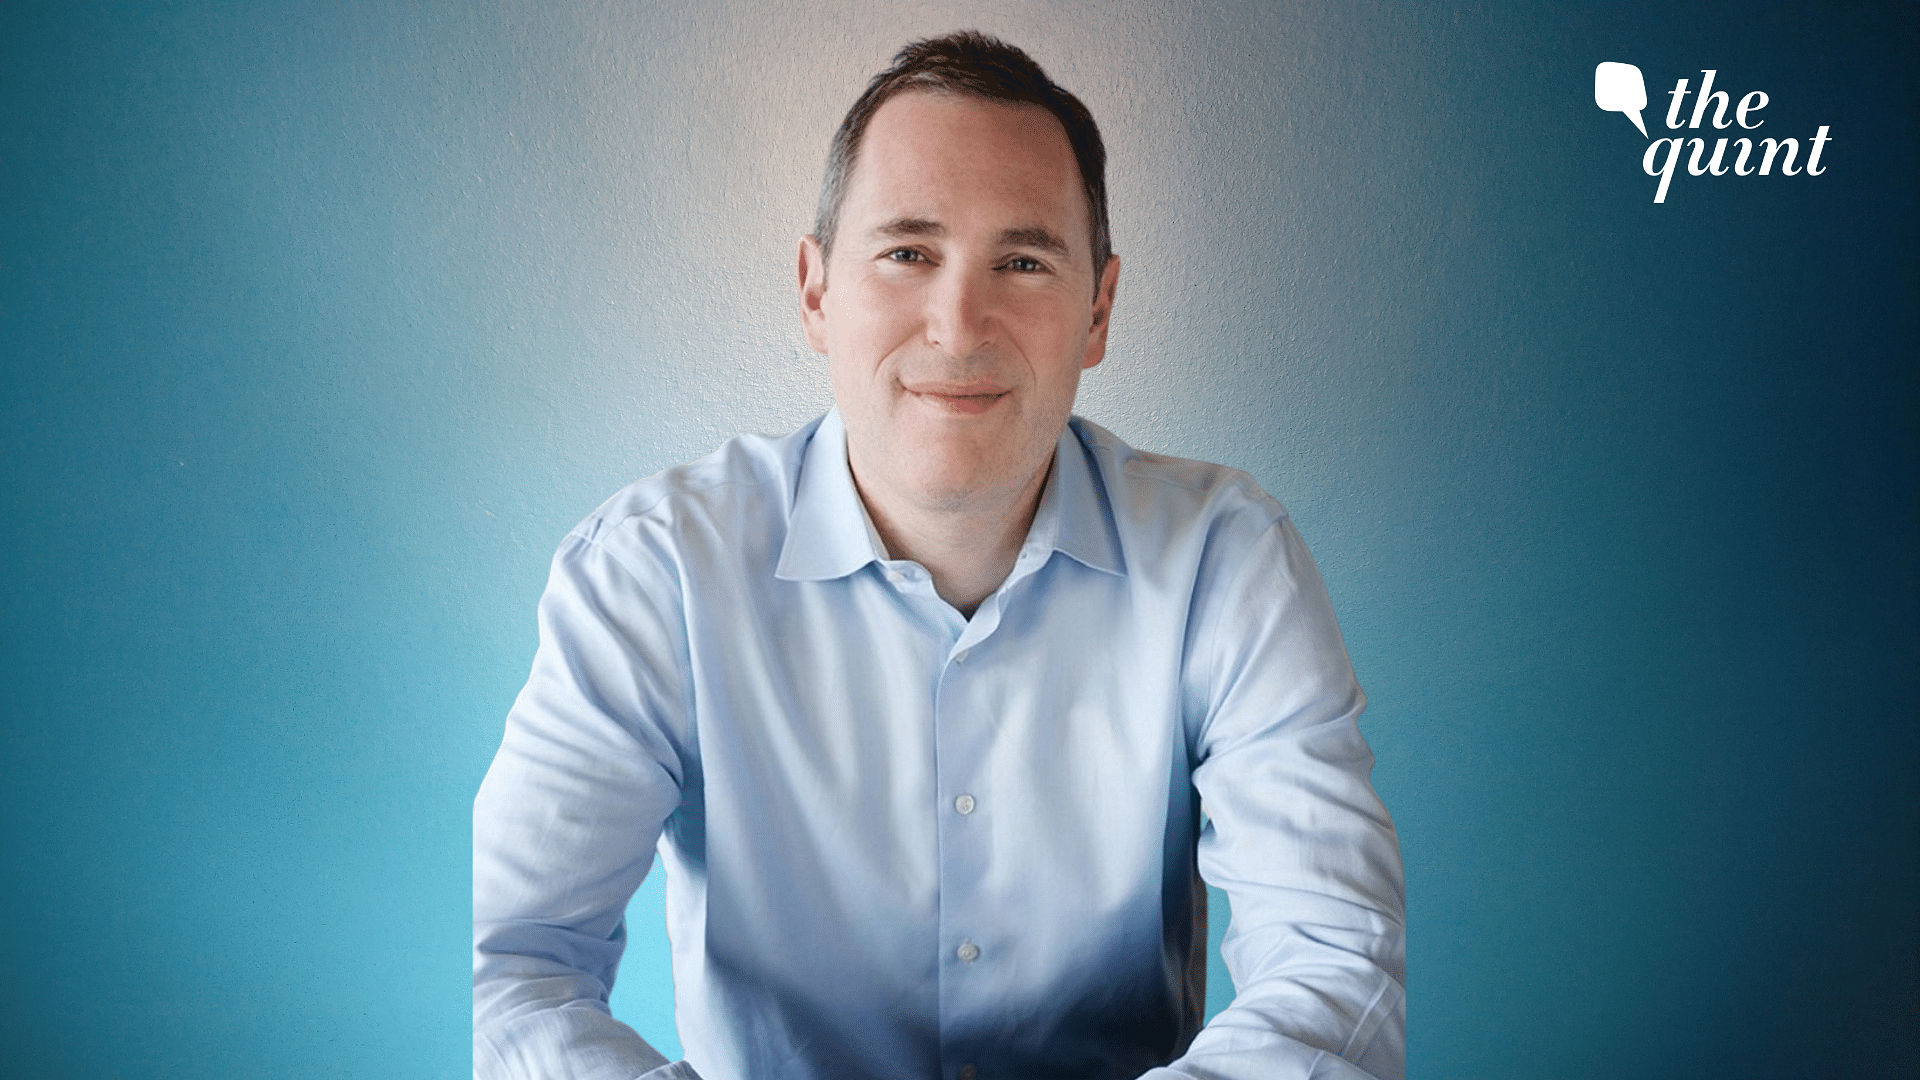 <div class="paragraphs"><p>Amazon's web services chief Andy Jassy will take over as the company's chief executive officer on Monday, 5 July.</p><p><br></p></div>